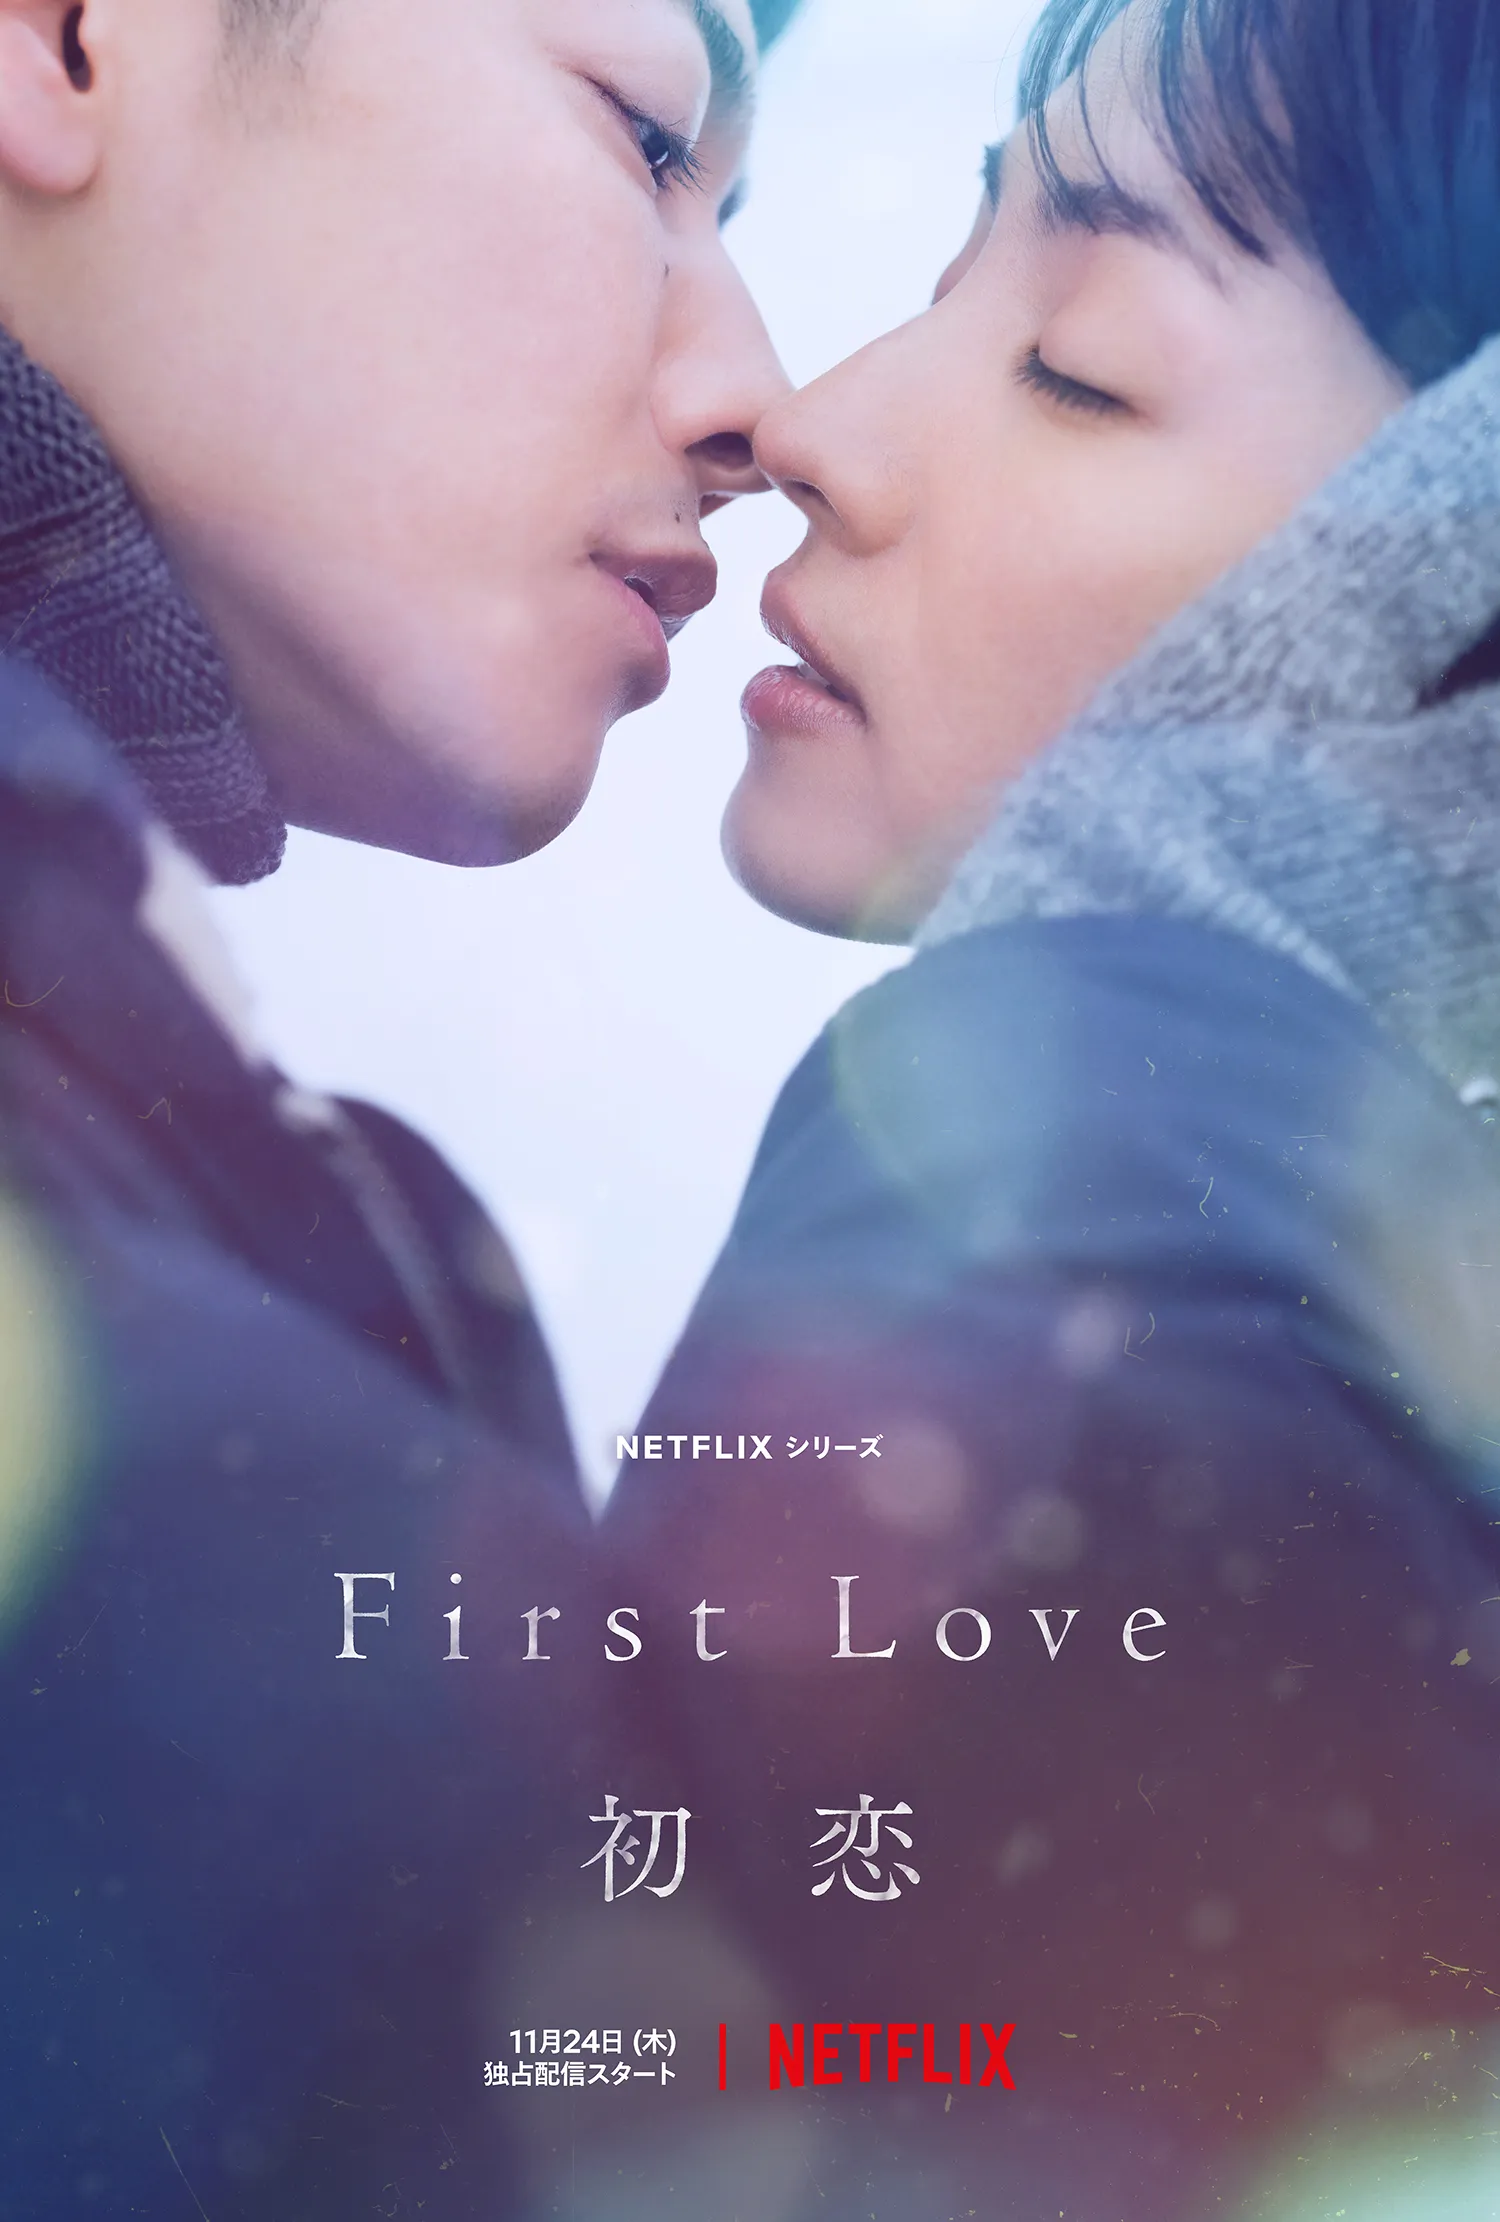 Netflix Japanese drama 'First Love' reveals new official trailer and poster | FMV6